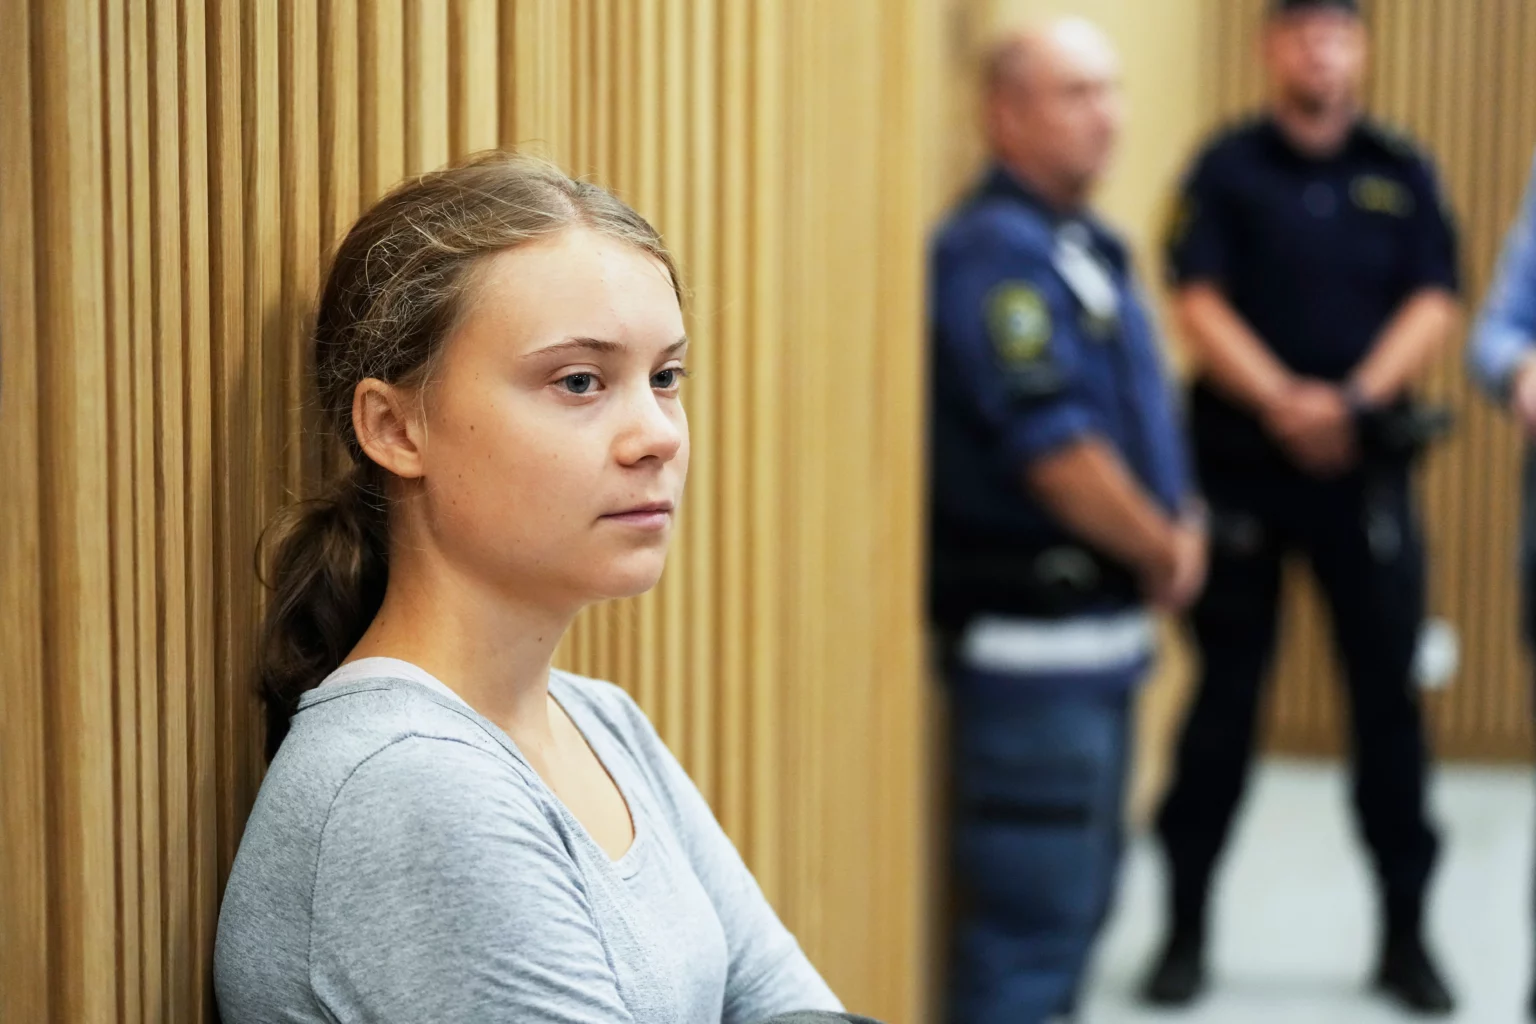 greta-thunberg-was-removed-by-police-from-climate-protest-after-she-disobeyed-a-police-order